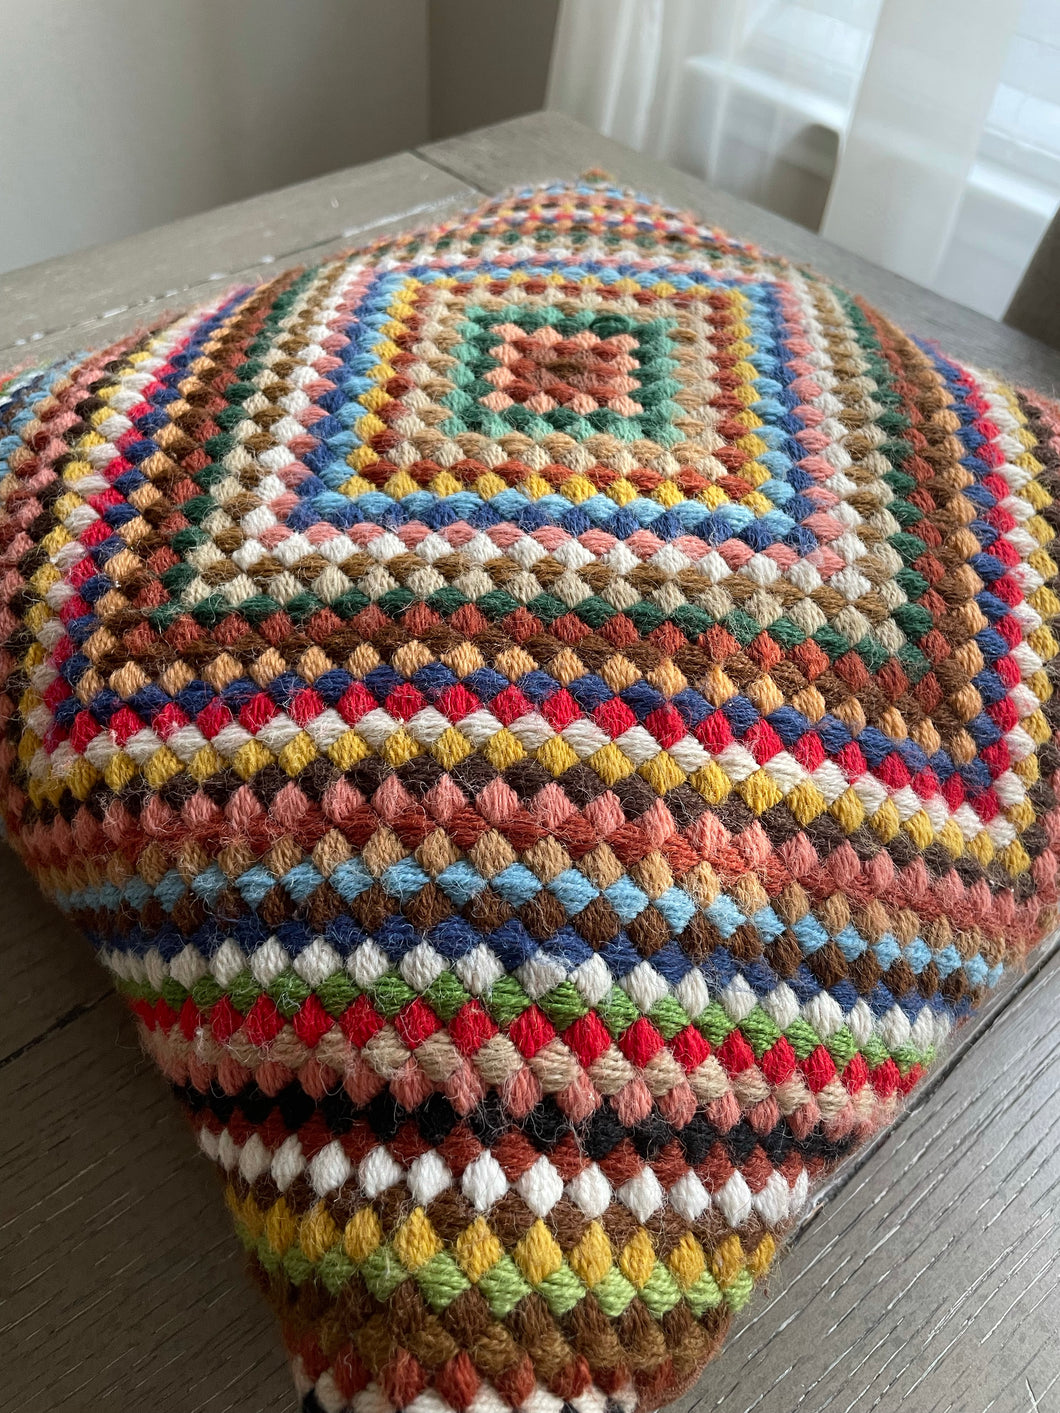 Multi-Colored/ Brown Corduroy Pillow